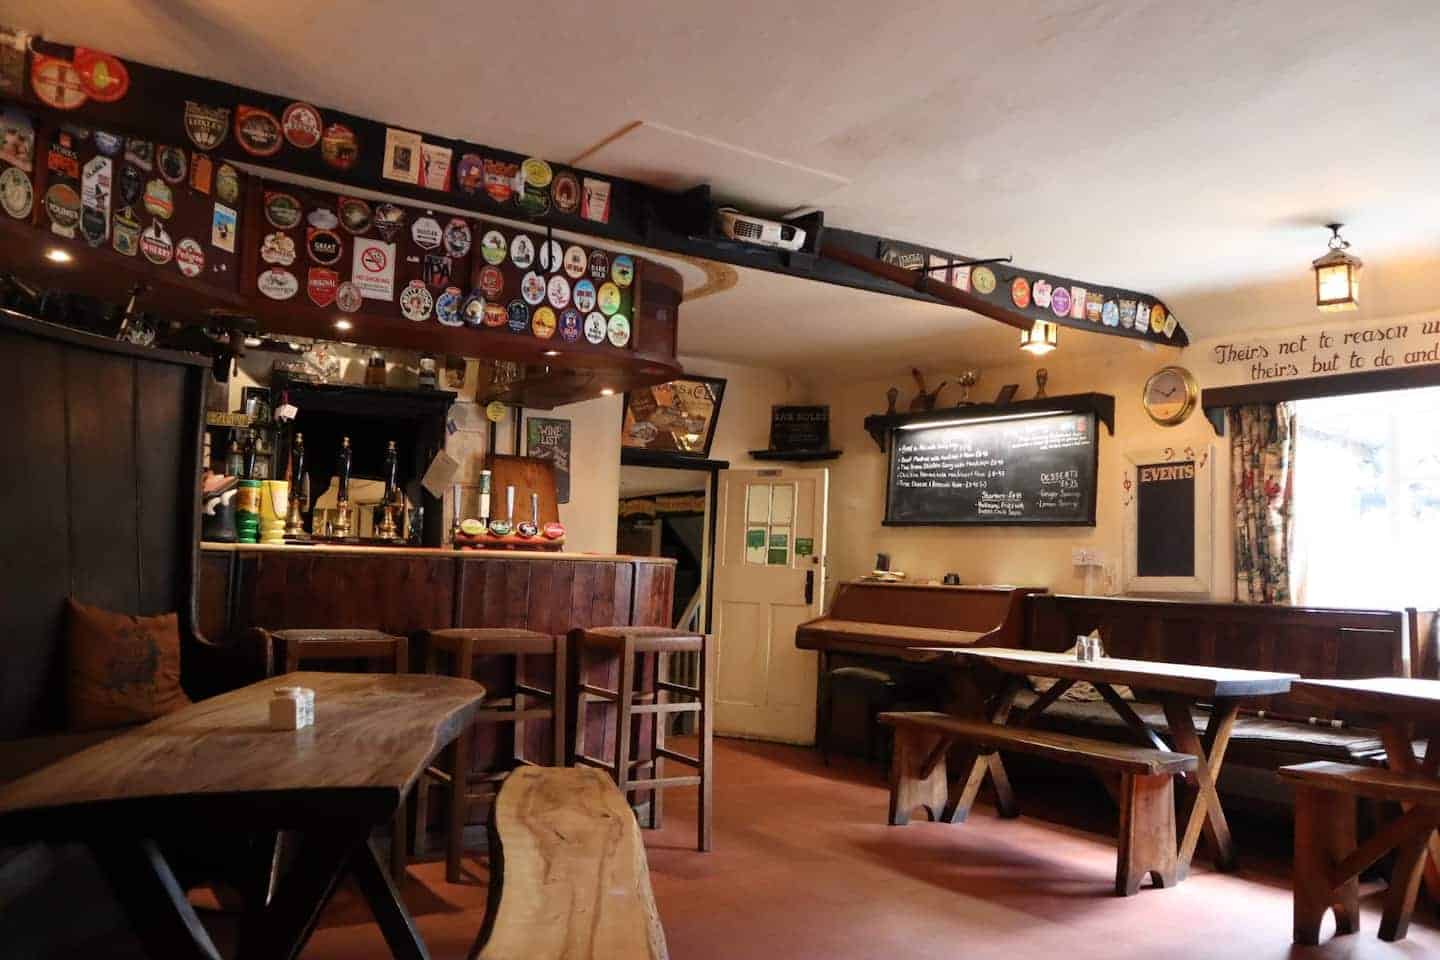 16th-century pub listed on Airbnb with unlimited use of the bar